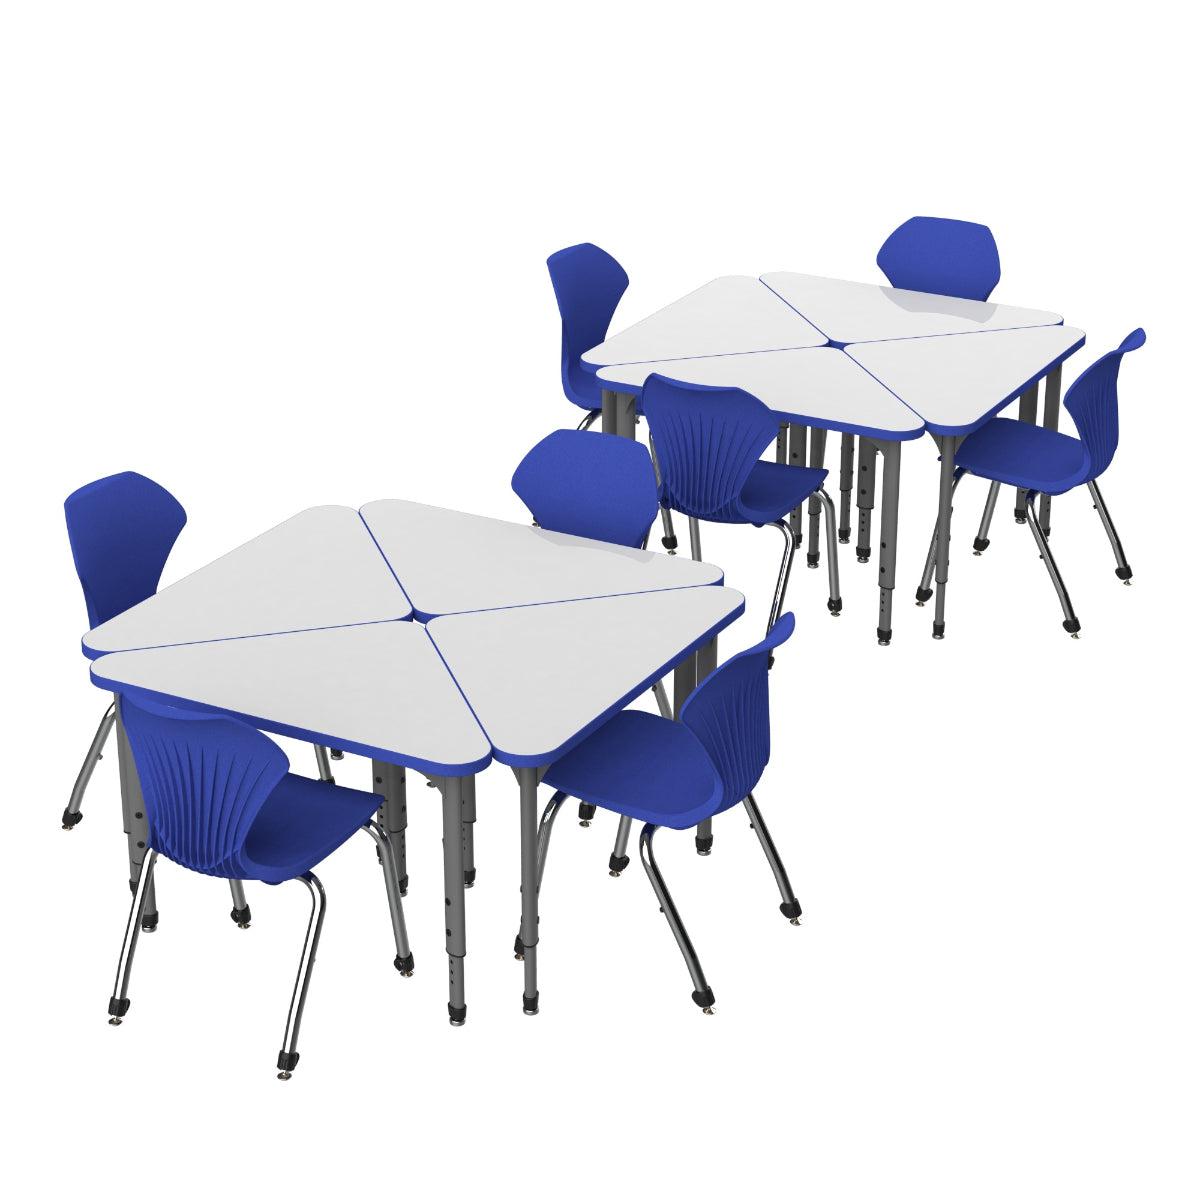 Apex Dry Erase Classroom Desk and Chair Package, 8 Triangle Collaborative Student Desks with 8 Apex Stack Chairs